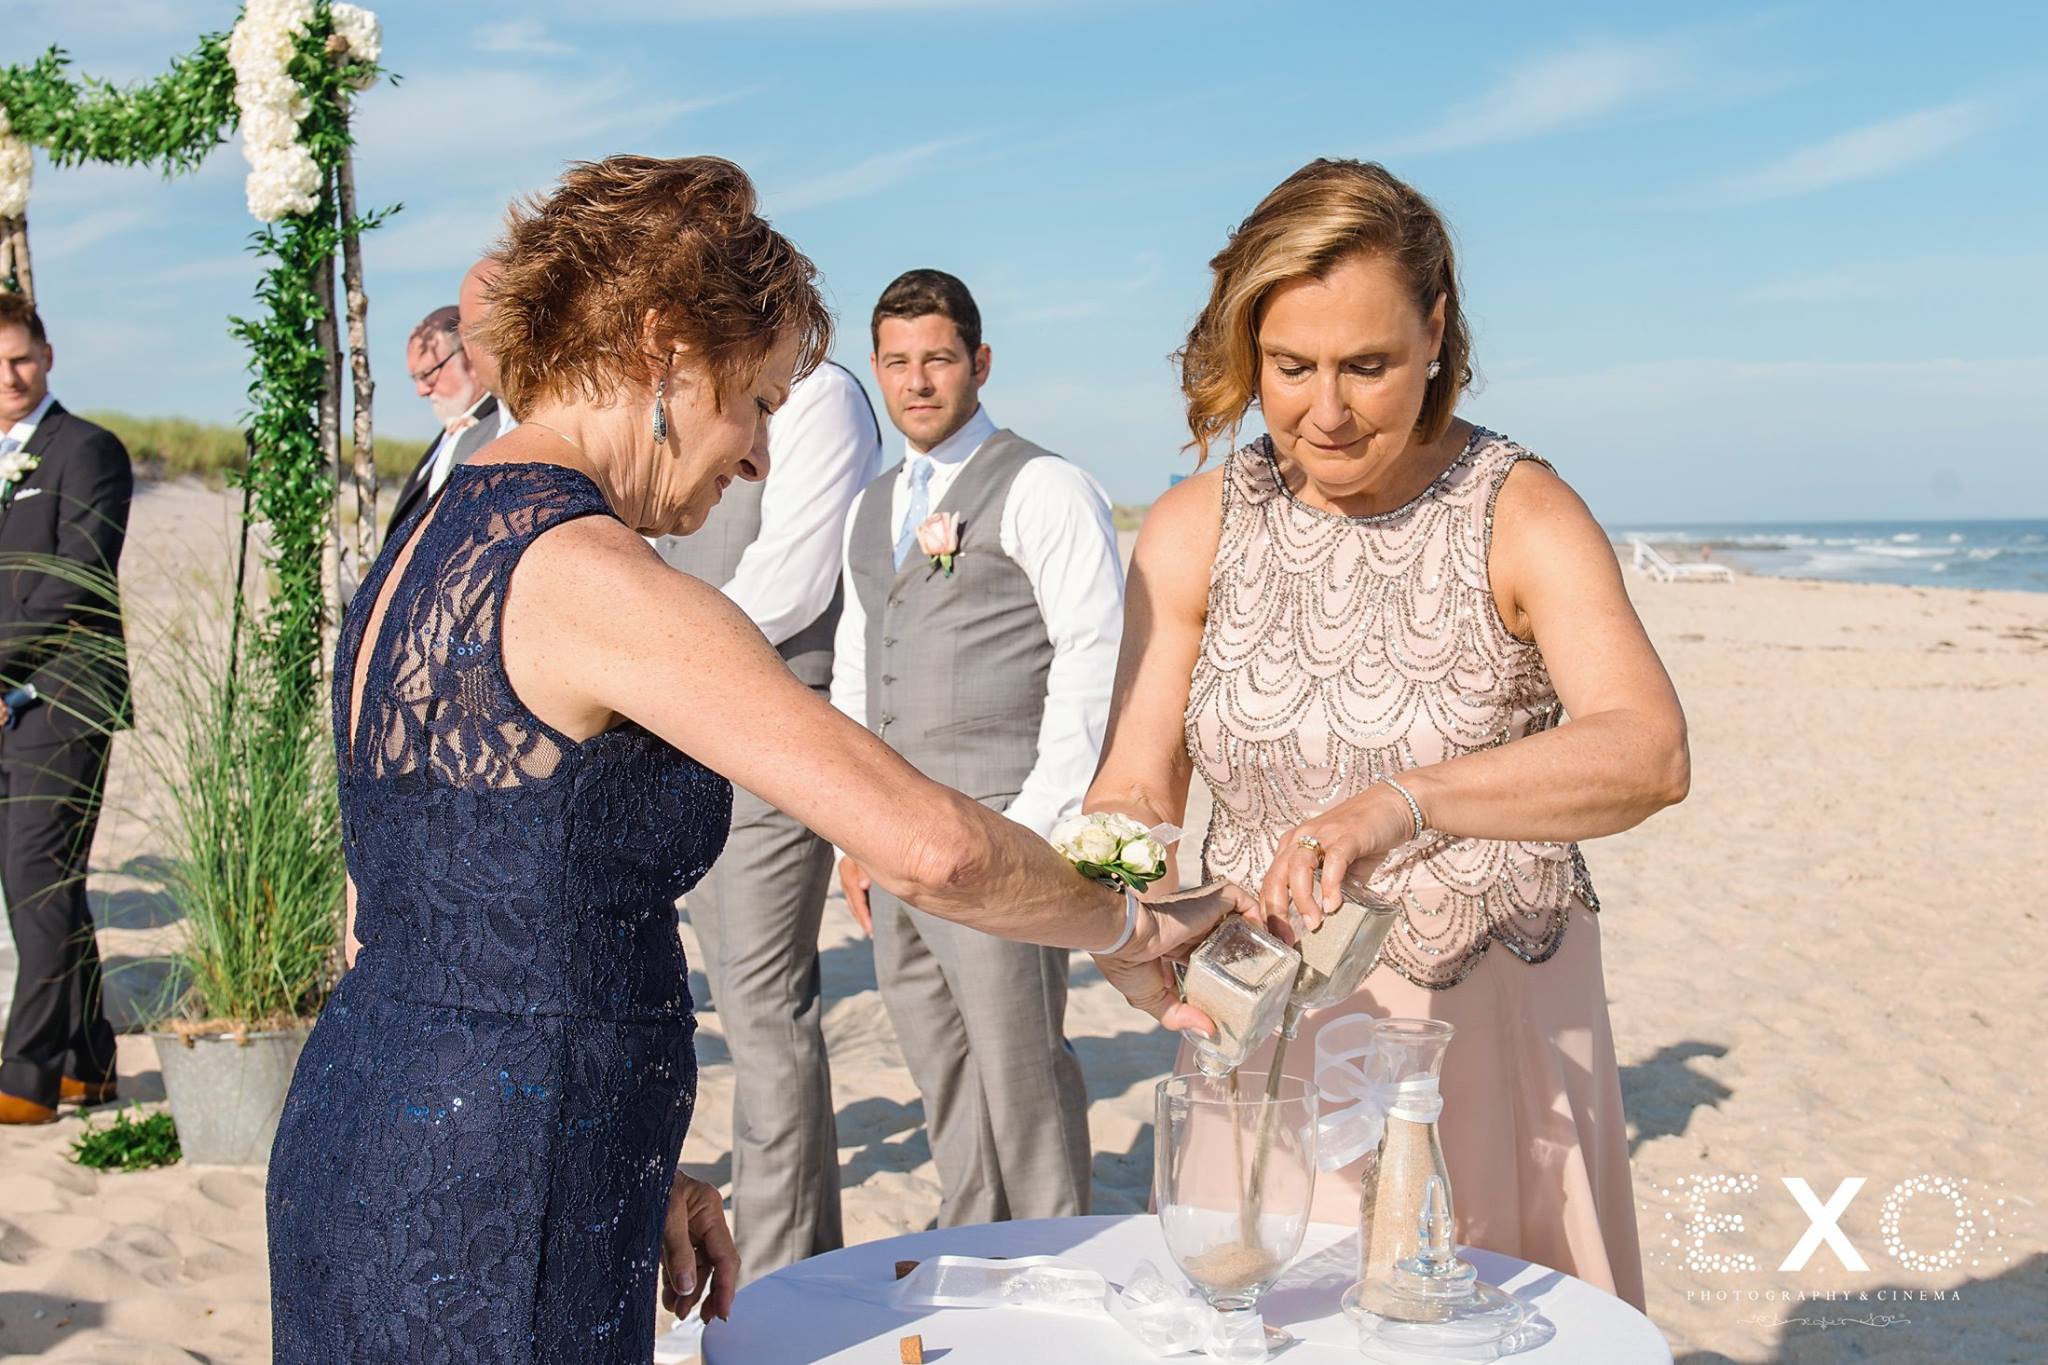 mother of bride and groom pouring sand during ceremony